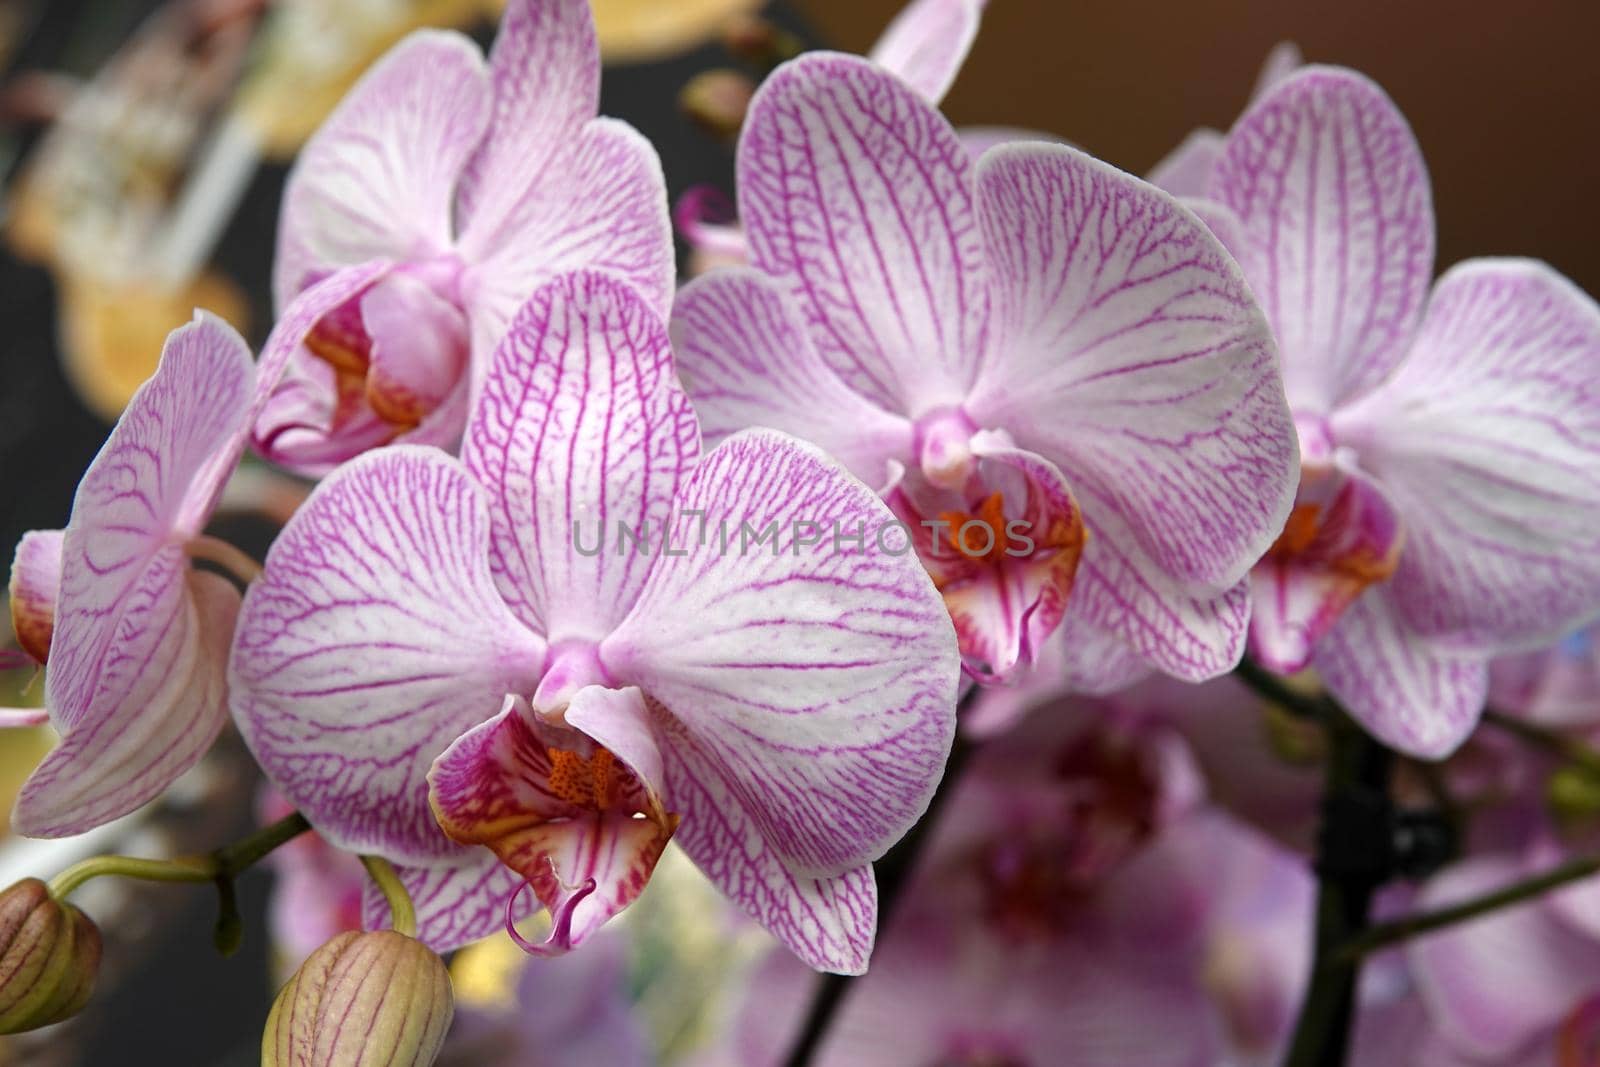 Striped pink and white moth orchid by WielandTeixeira